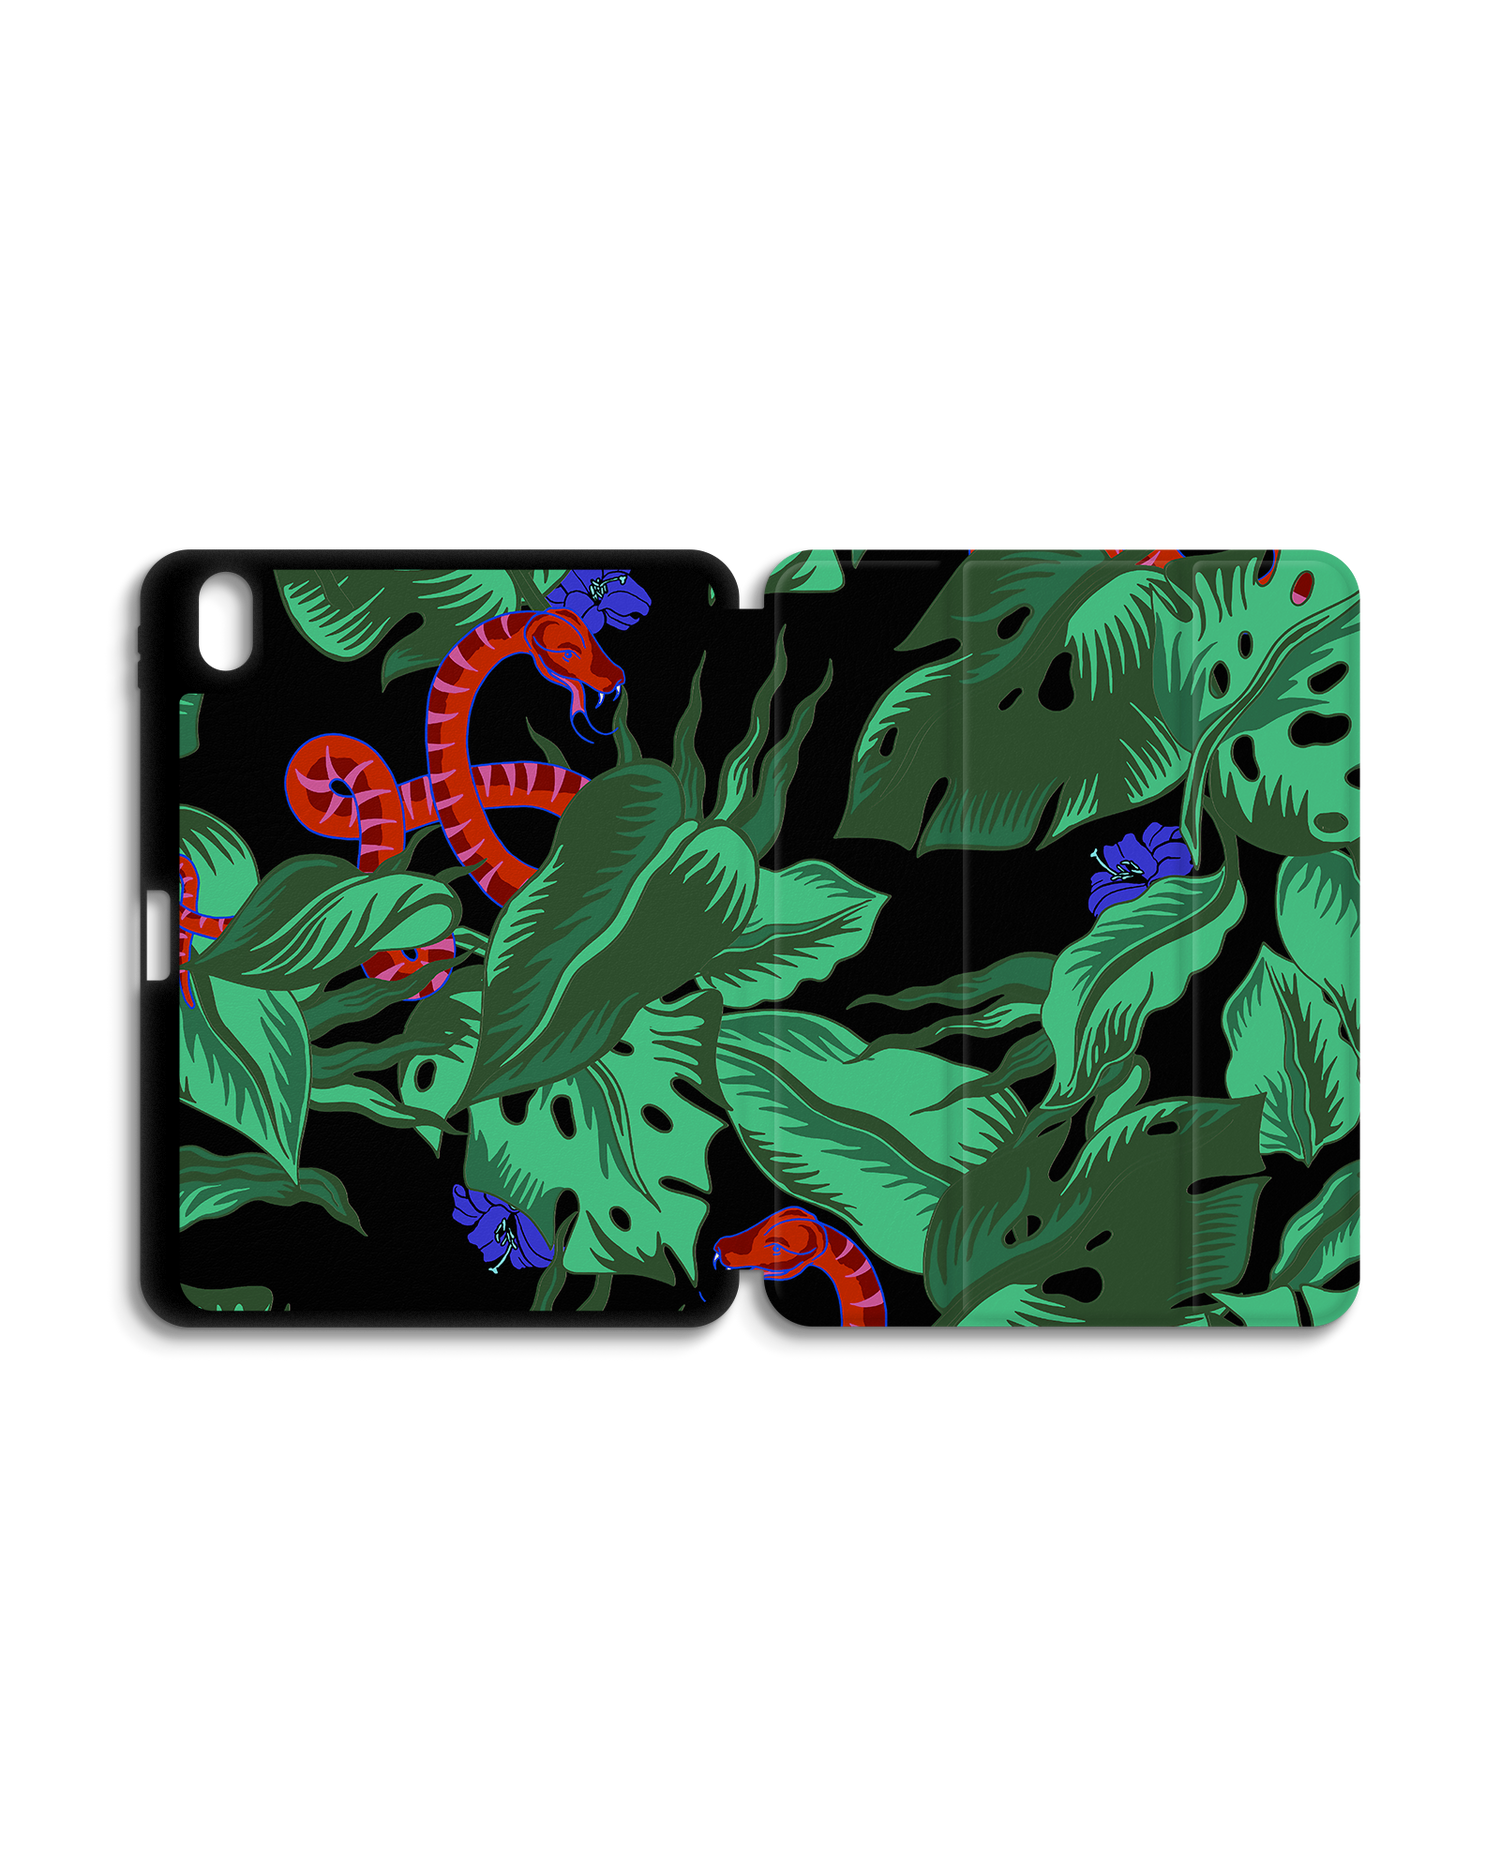 Tropical Snakes iPad Case with Pencil Holder for Apple iPad (10th Generation): Opened exterior view